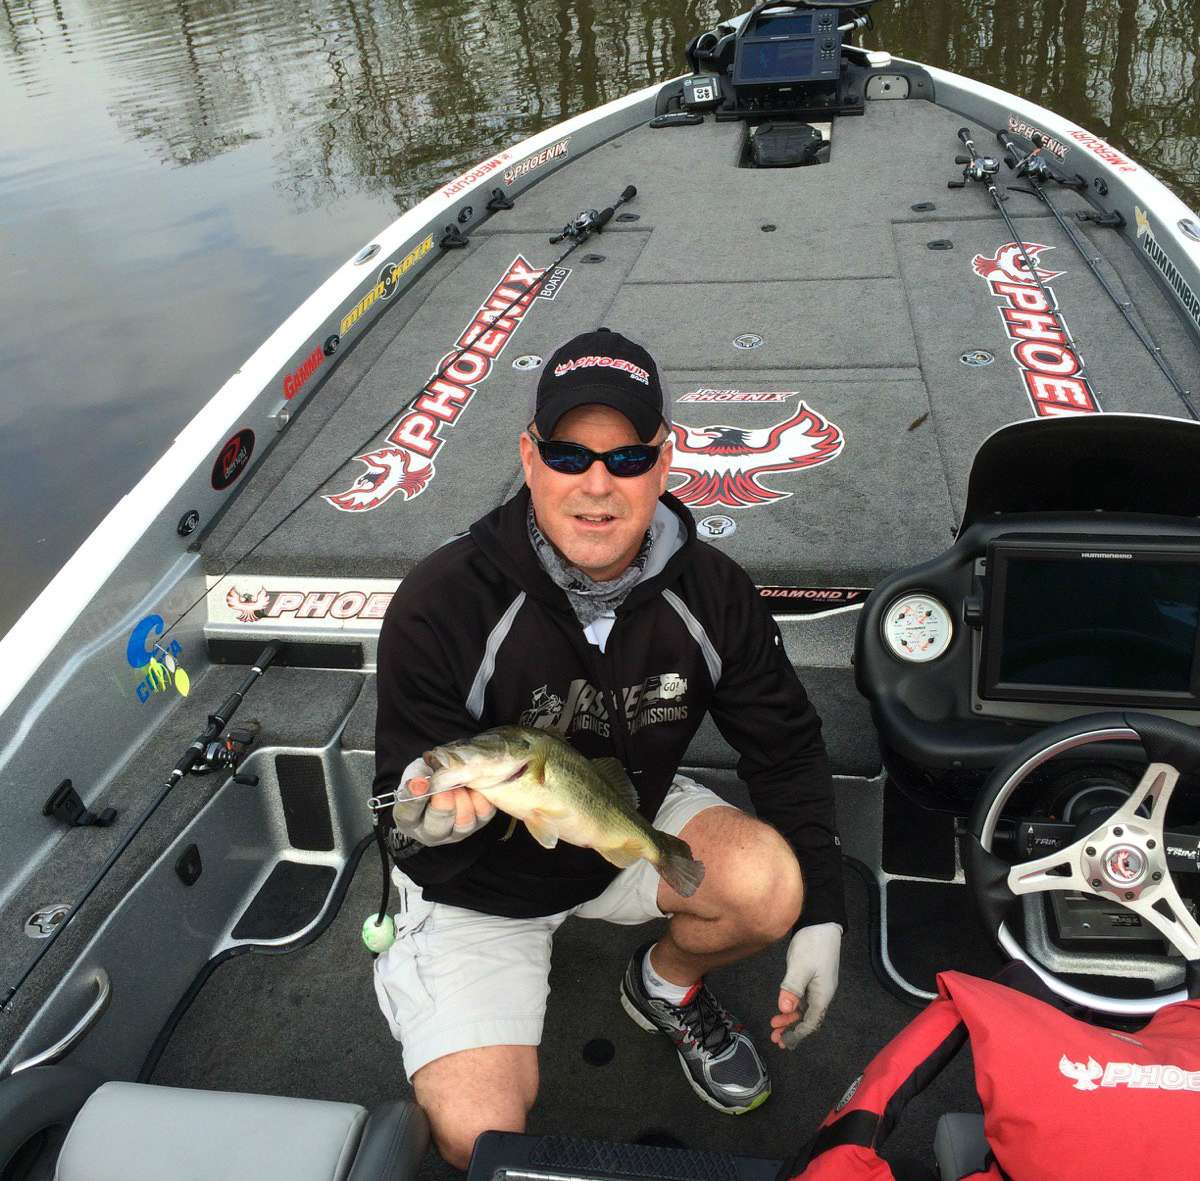 From marshals to B.A.S.S. staffers, everyone gets in on the action when it comes to sending in up-to-the-minute photos and updates to the live blog. Check out the best of the best blog photos sent in from the water during the Bassmaster Elite at Sabine River.